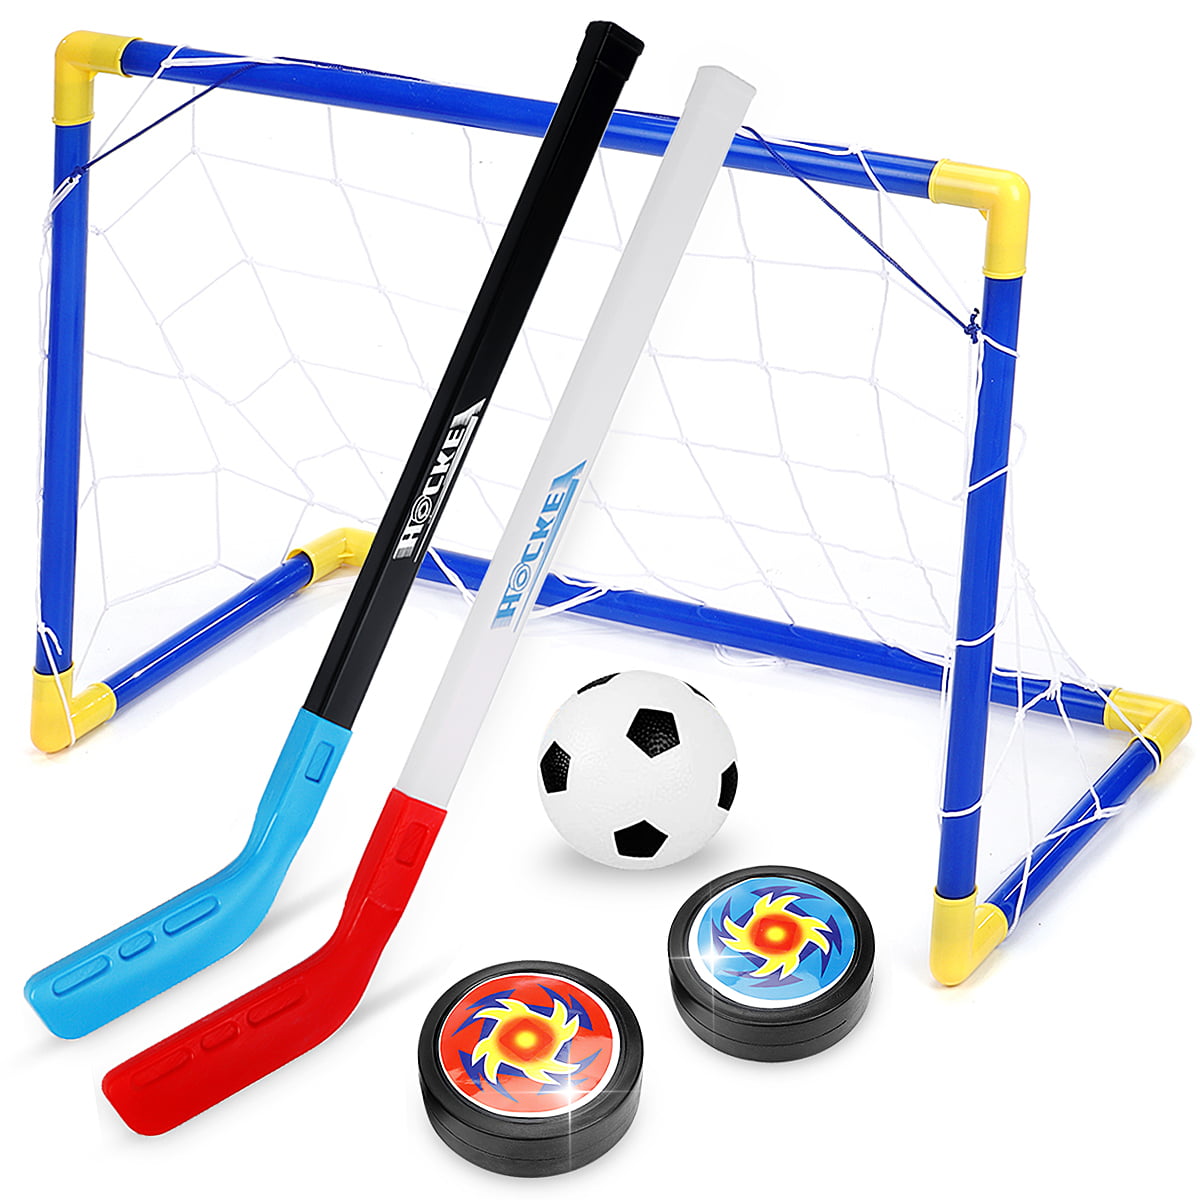 Kids Air Hockey Set Hover Soccer Football Field Toy Ball Pusher Gate TH1438 